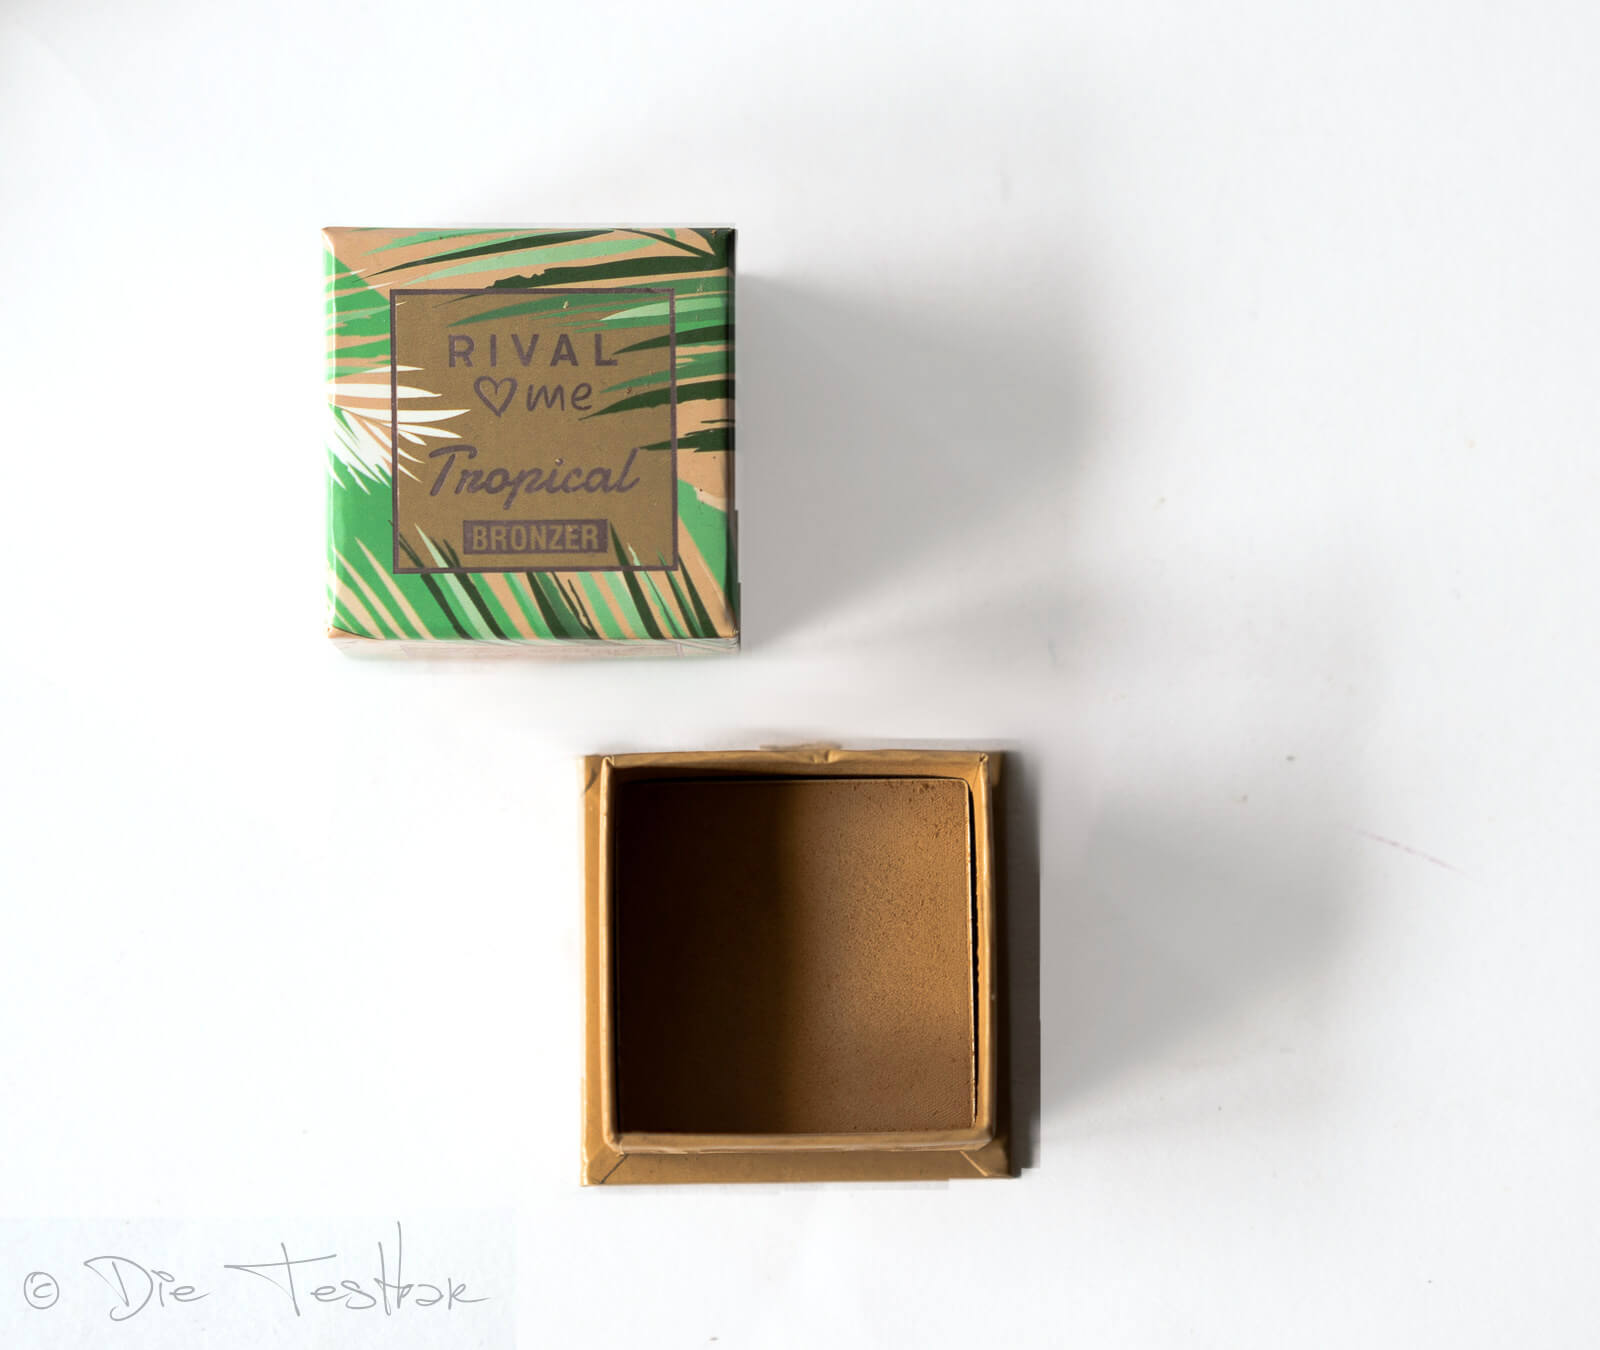 Review - RIVAL loves me - Tropical Bronzer 3